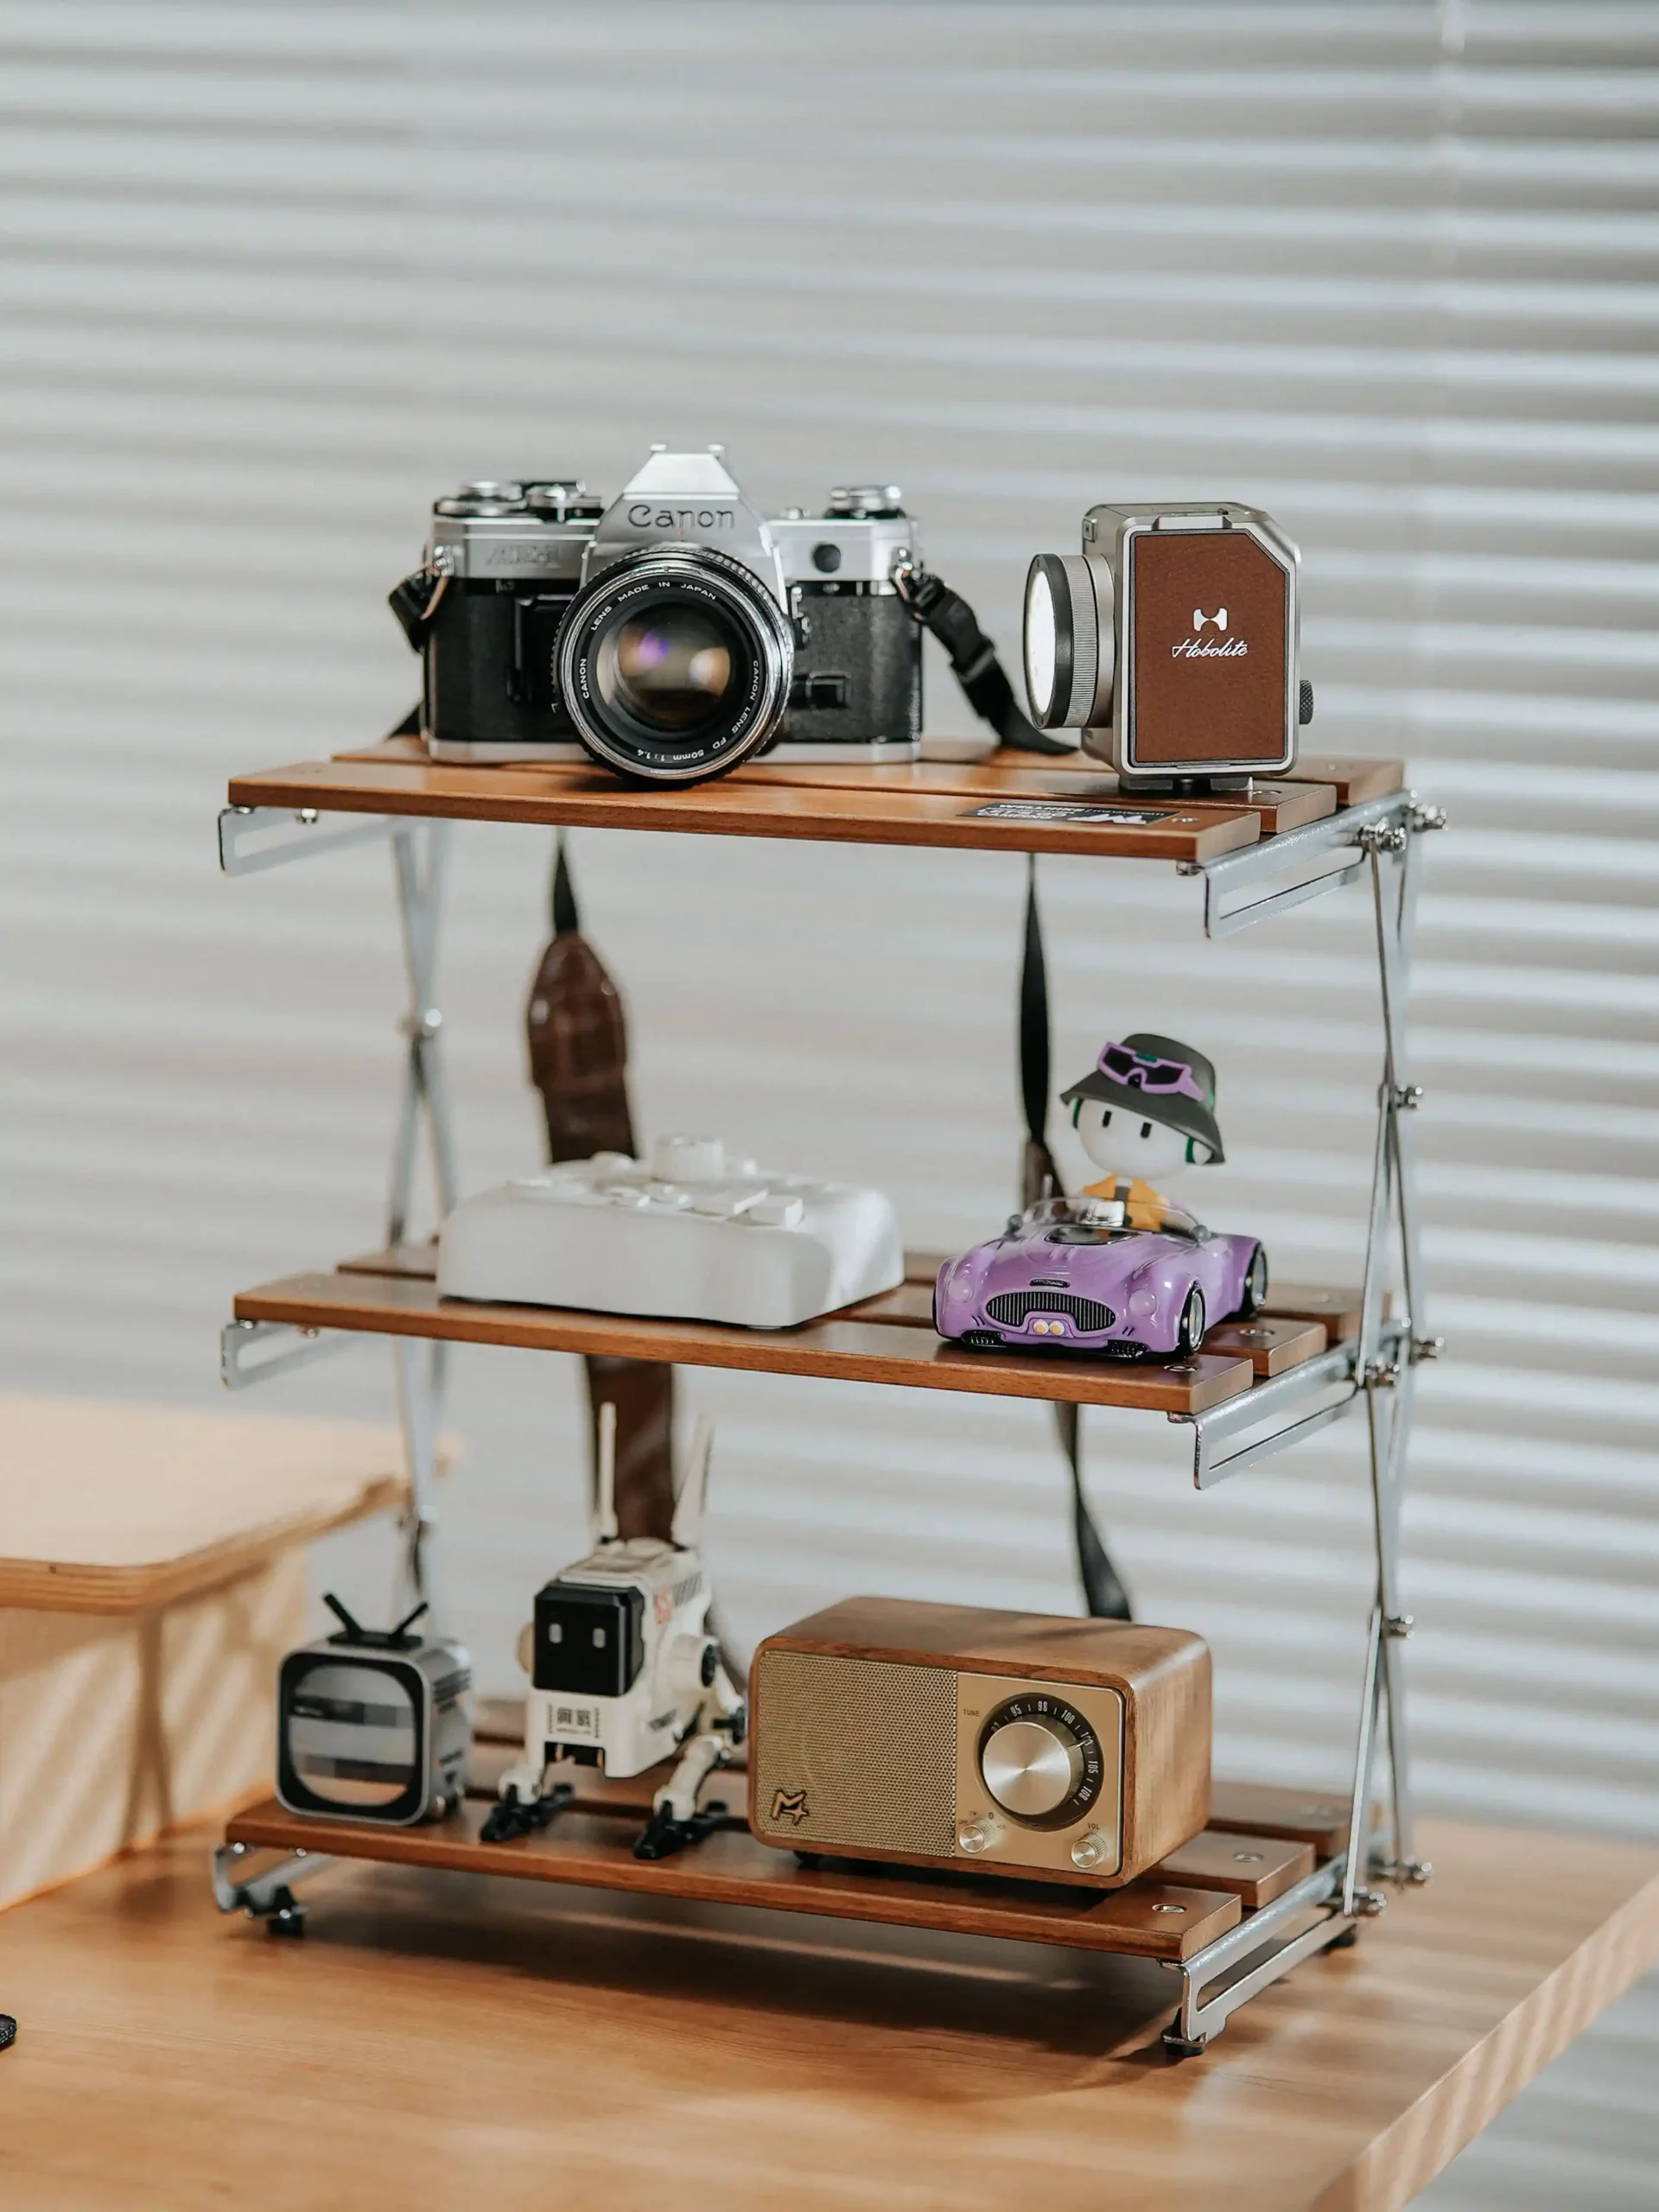 A display shelf with vintage cameras, a speaker, and assorted miniatures including a toy car and a small television.